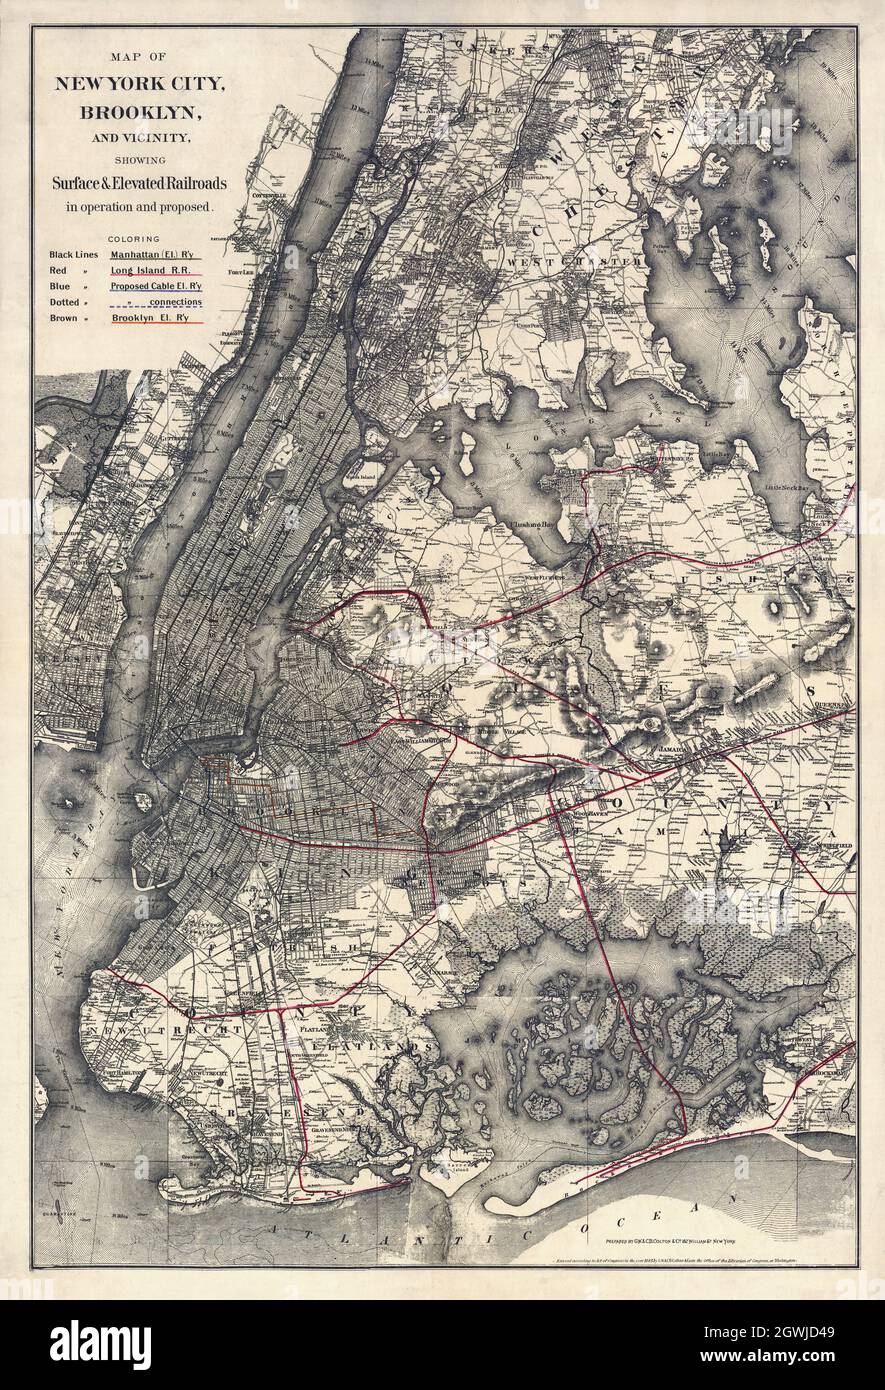 Map of New York City, Brooklyn, and vicinity showing surface & elevated railroads in operation and proposed. By G.W. & C.B. Colton & Co. 1885. Stock Photo